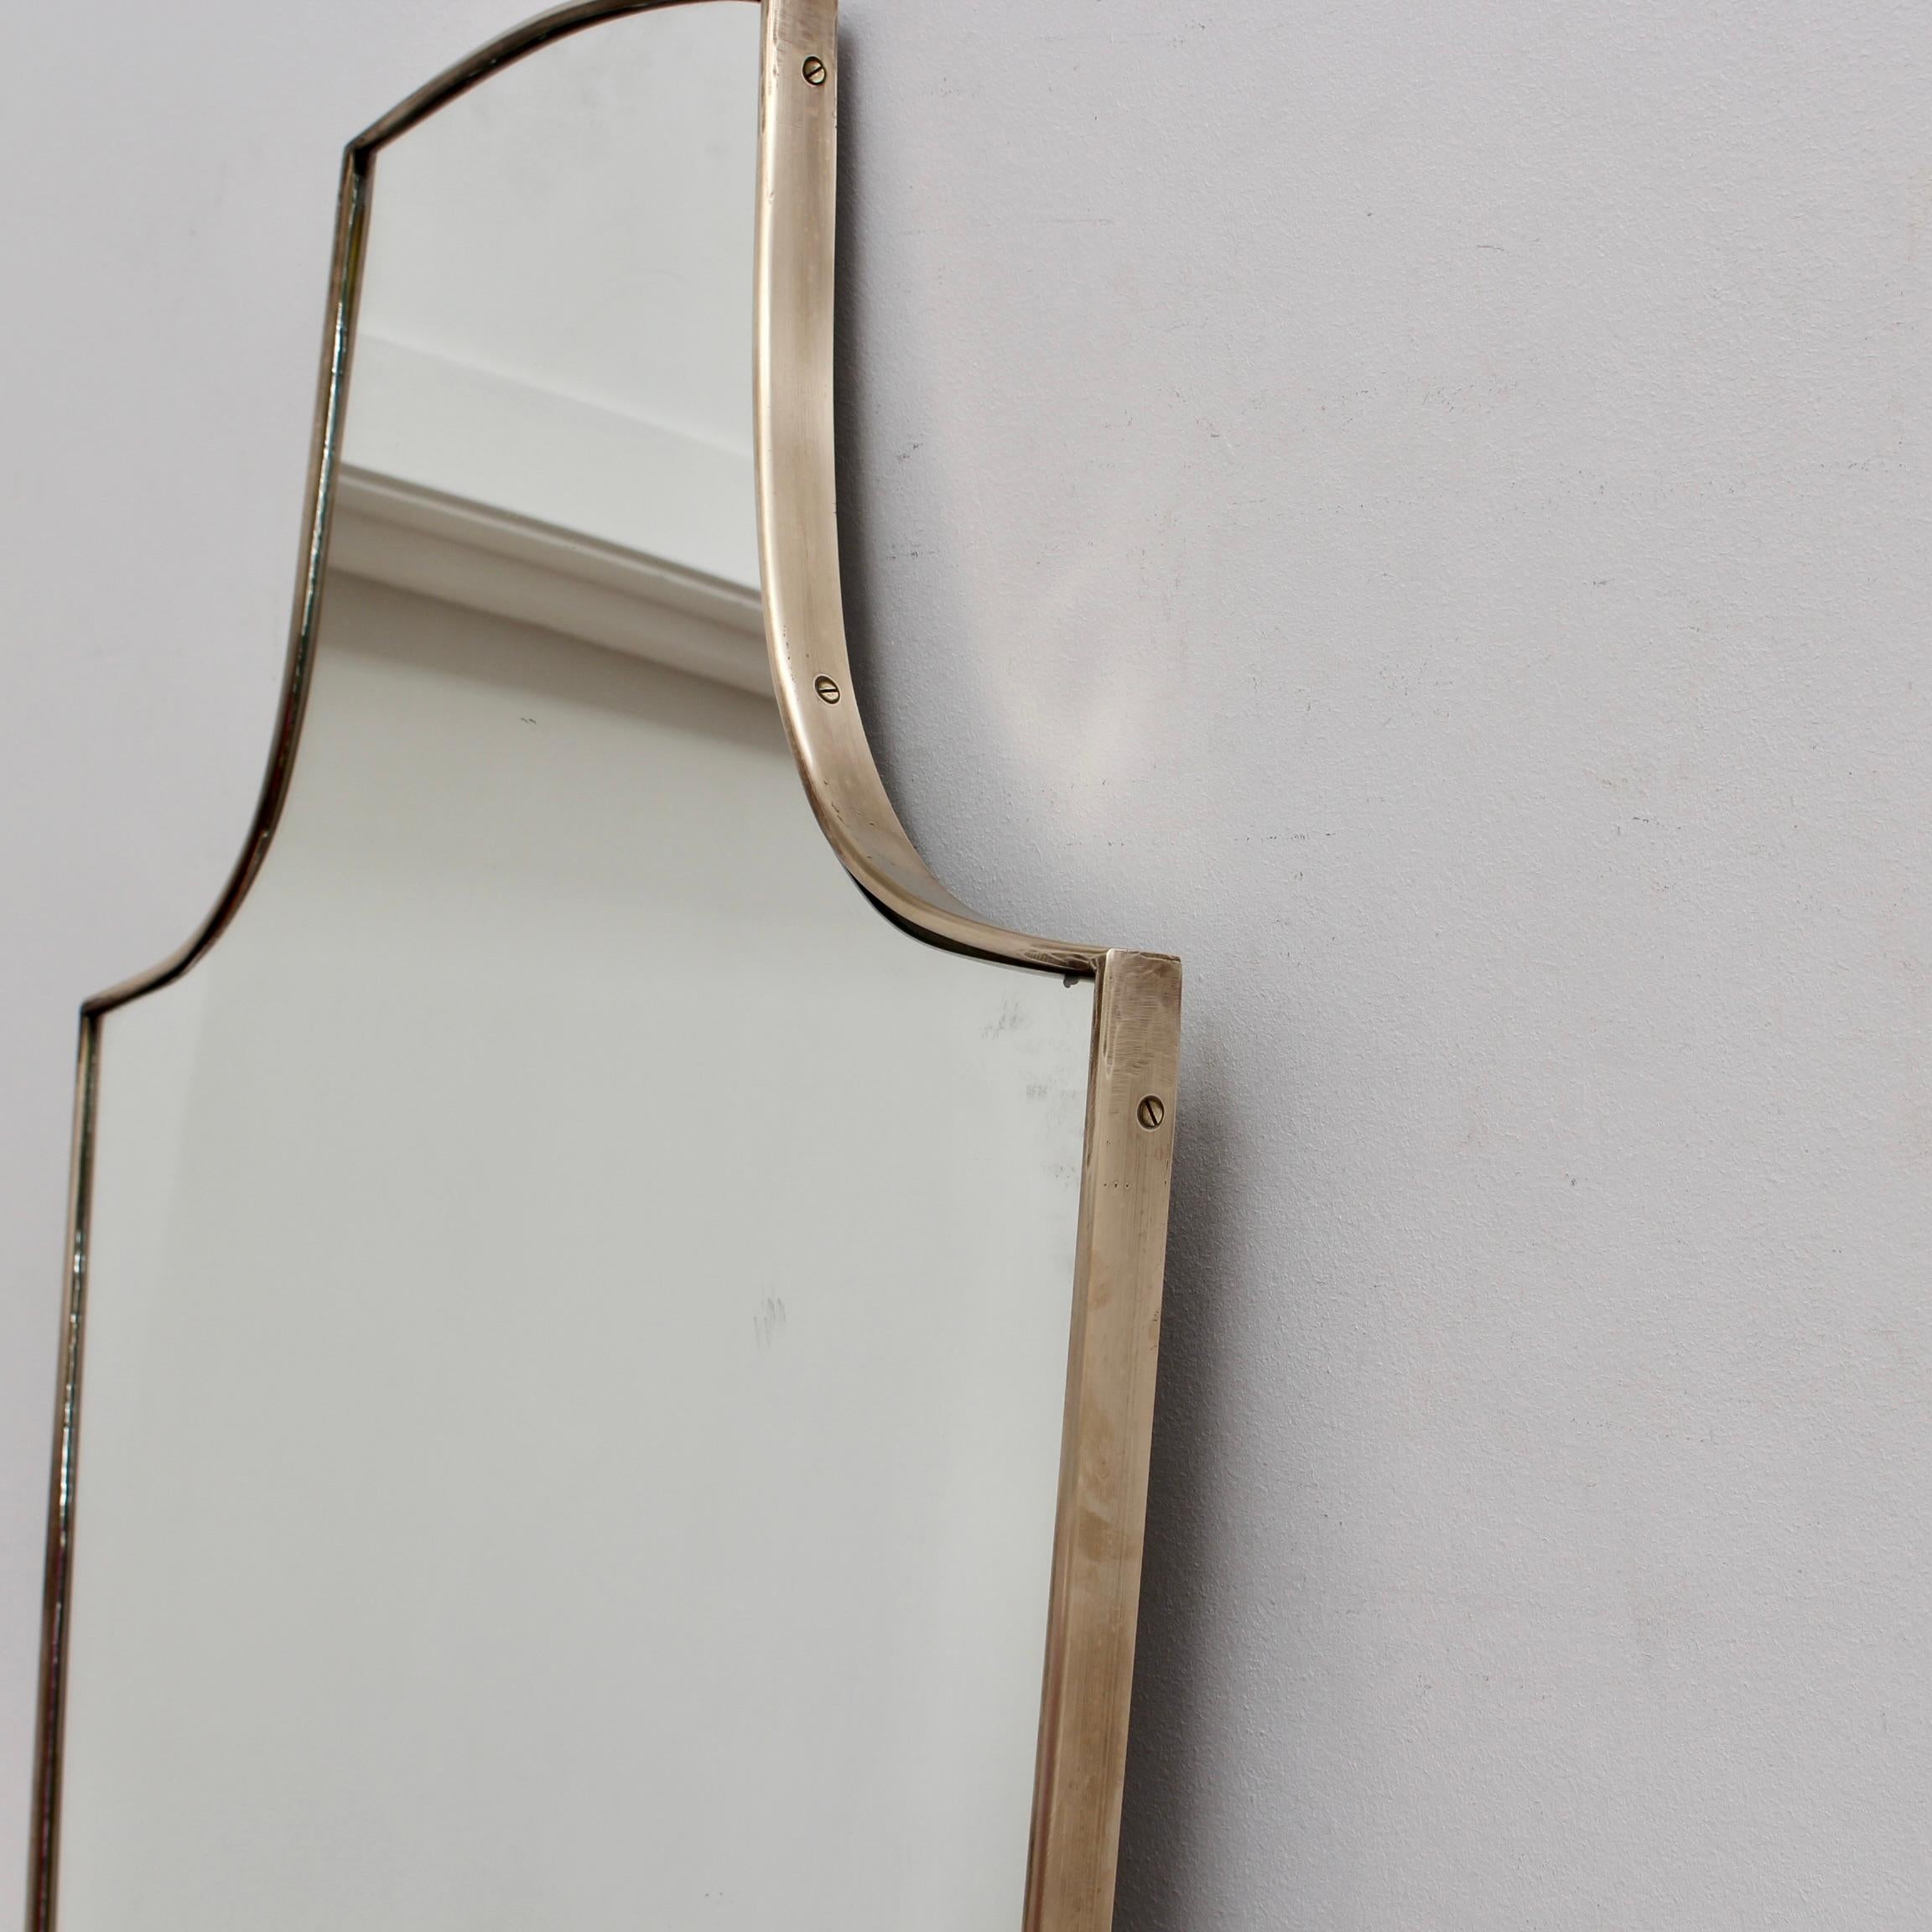 Vintage Italian Wall Mirror with Brass Frame, 'circa 1950s', Large For Sale 4